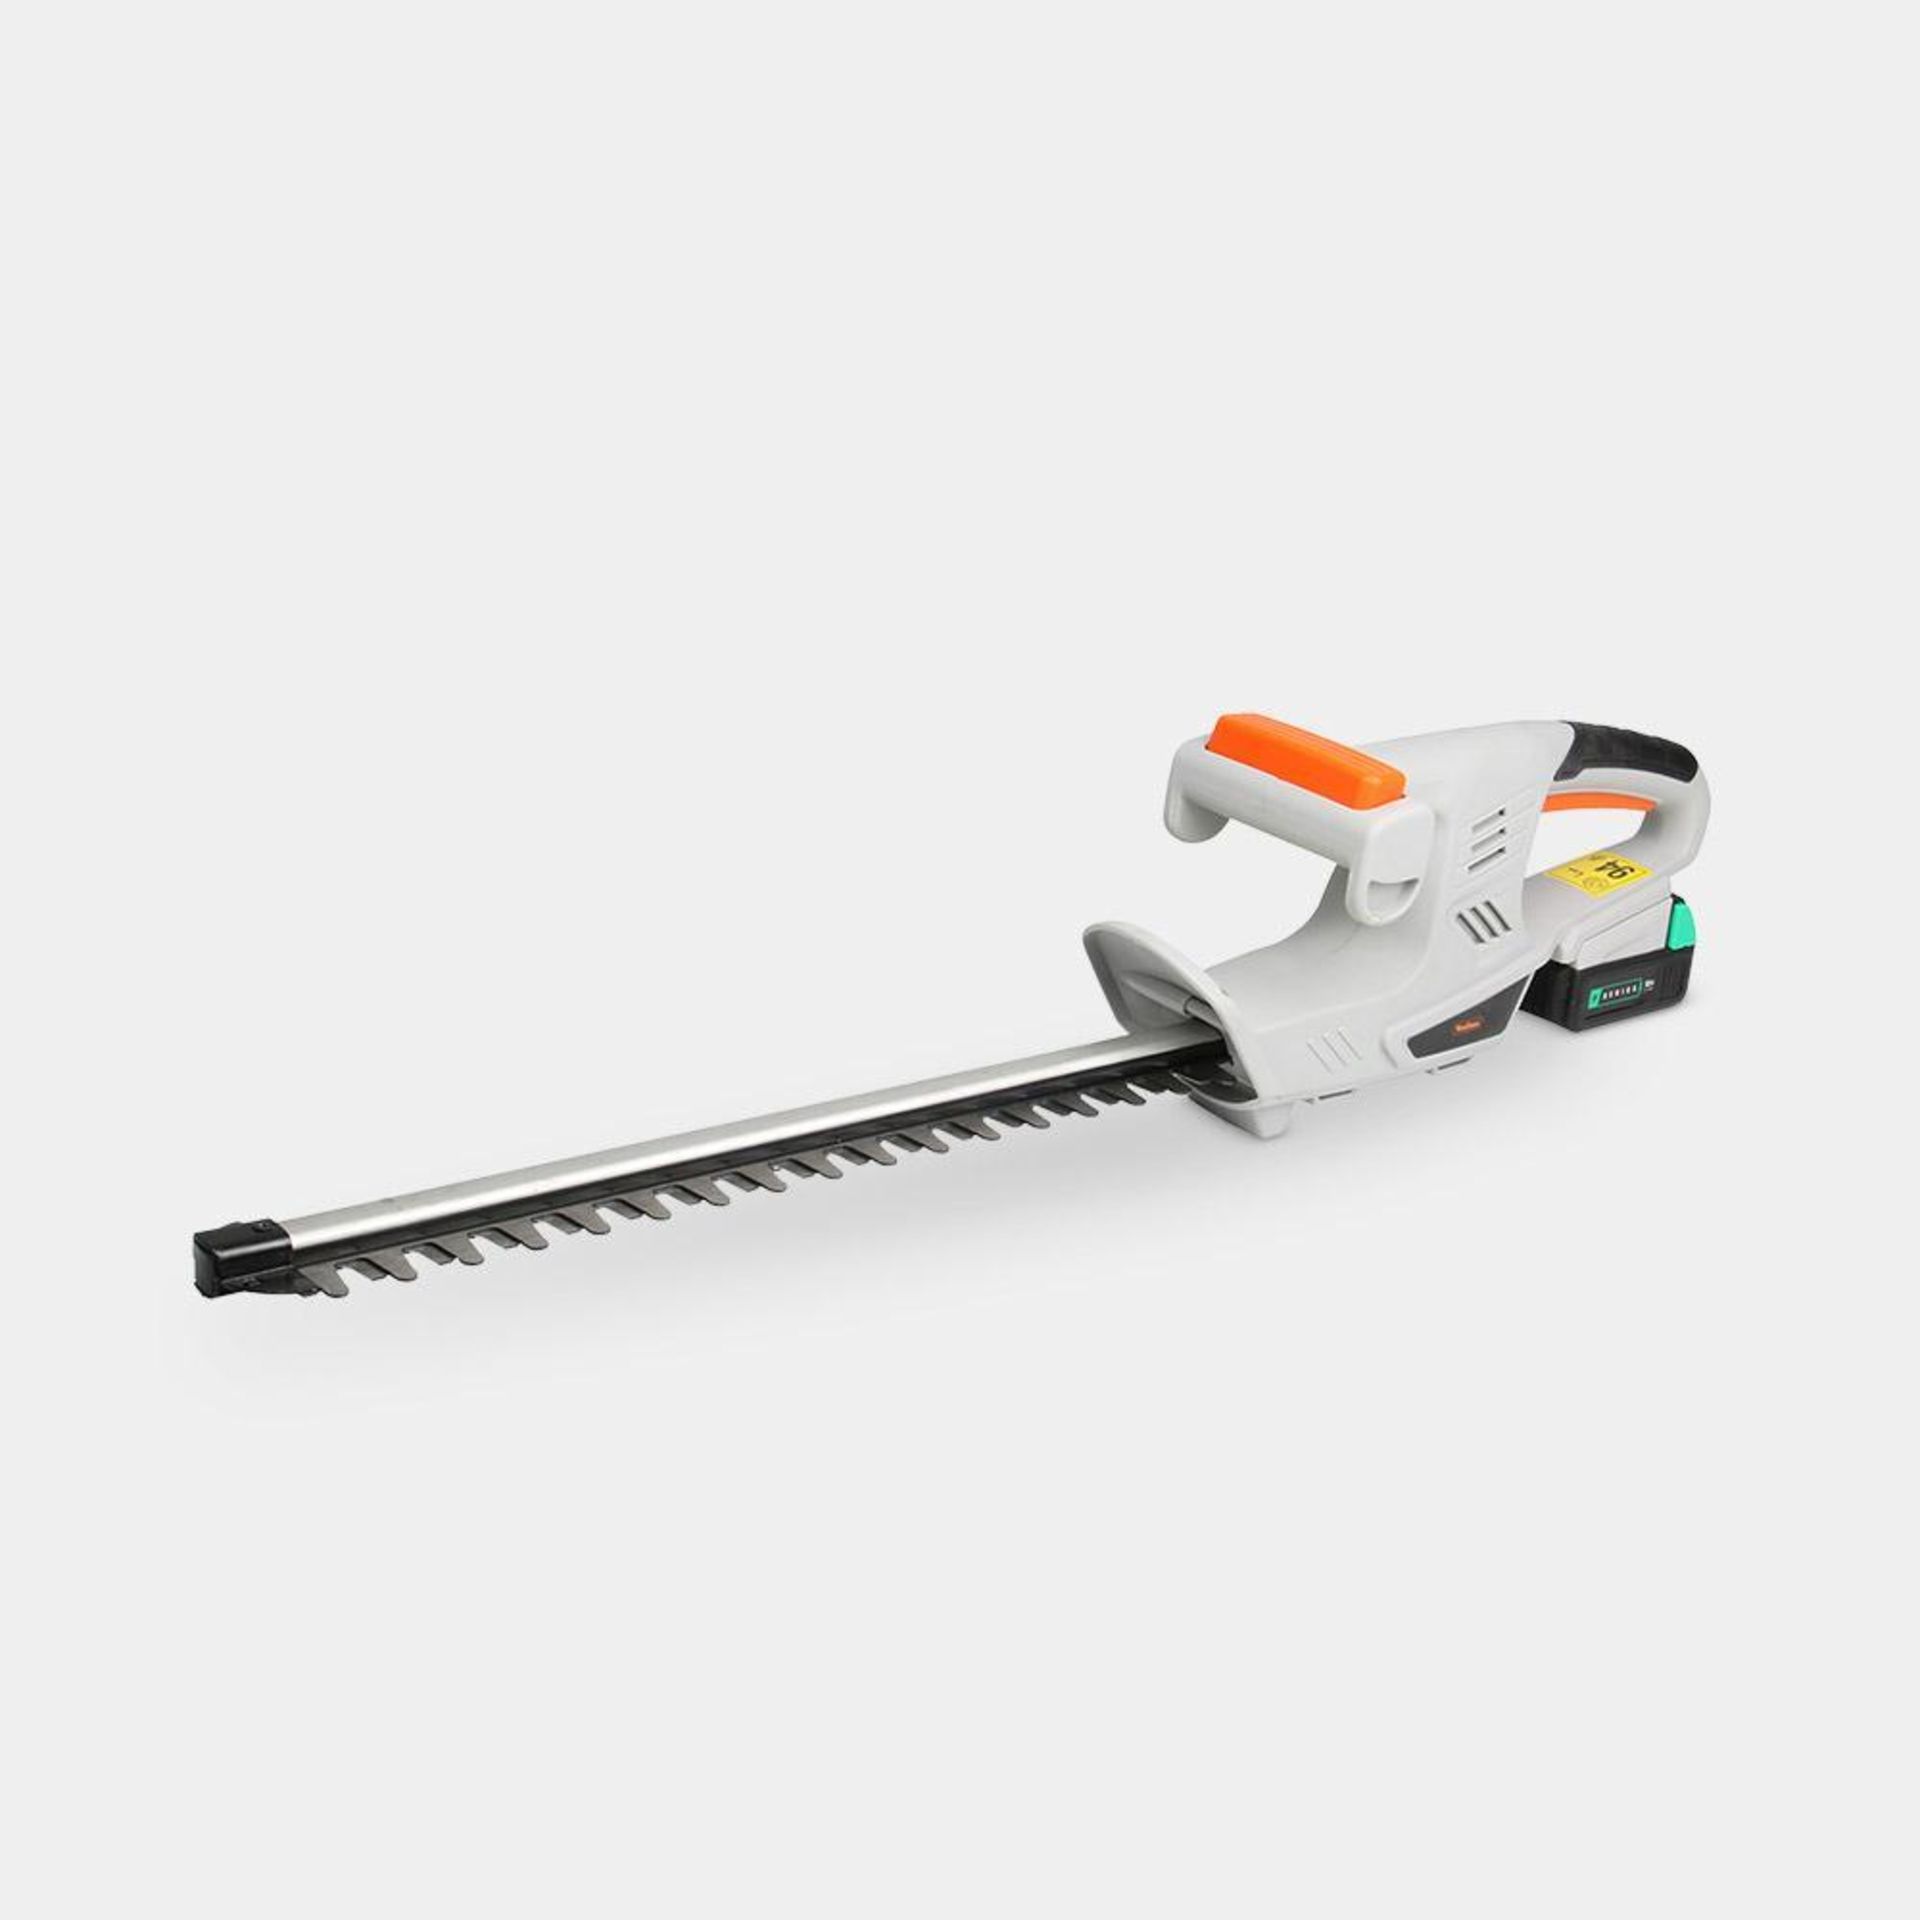 F-Series Cordless Hedge Trimmer - ER50. For those with smaller gardens, our 12V Max Hedge Trimmer